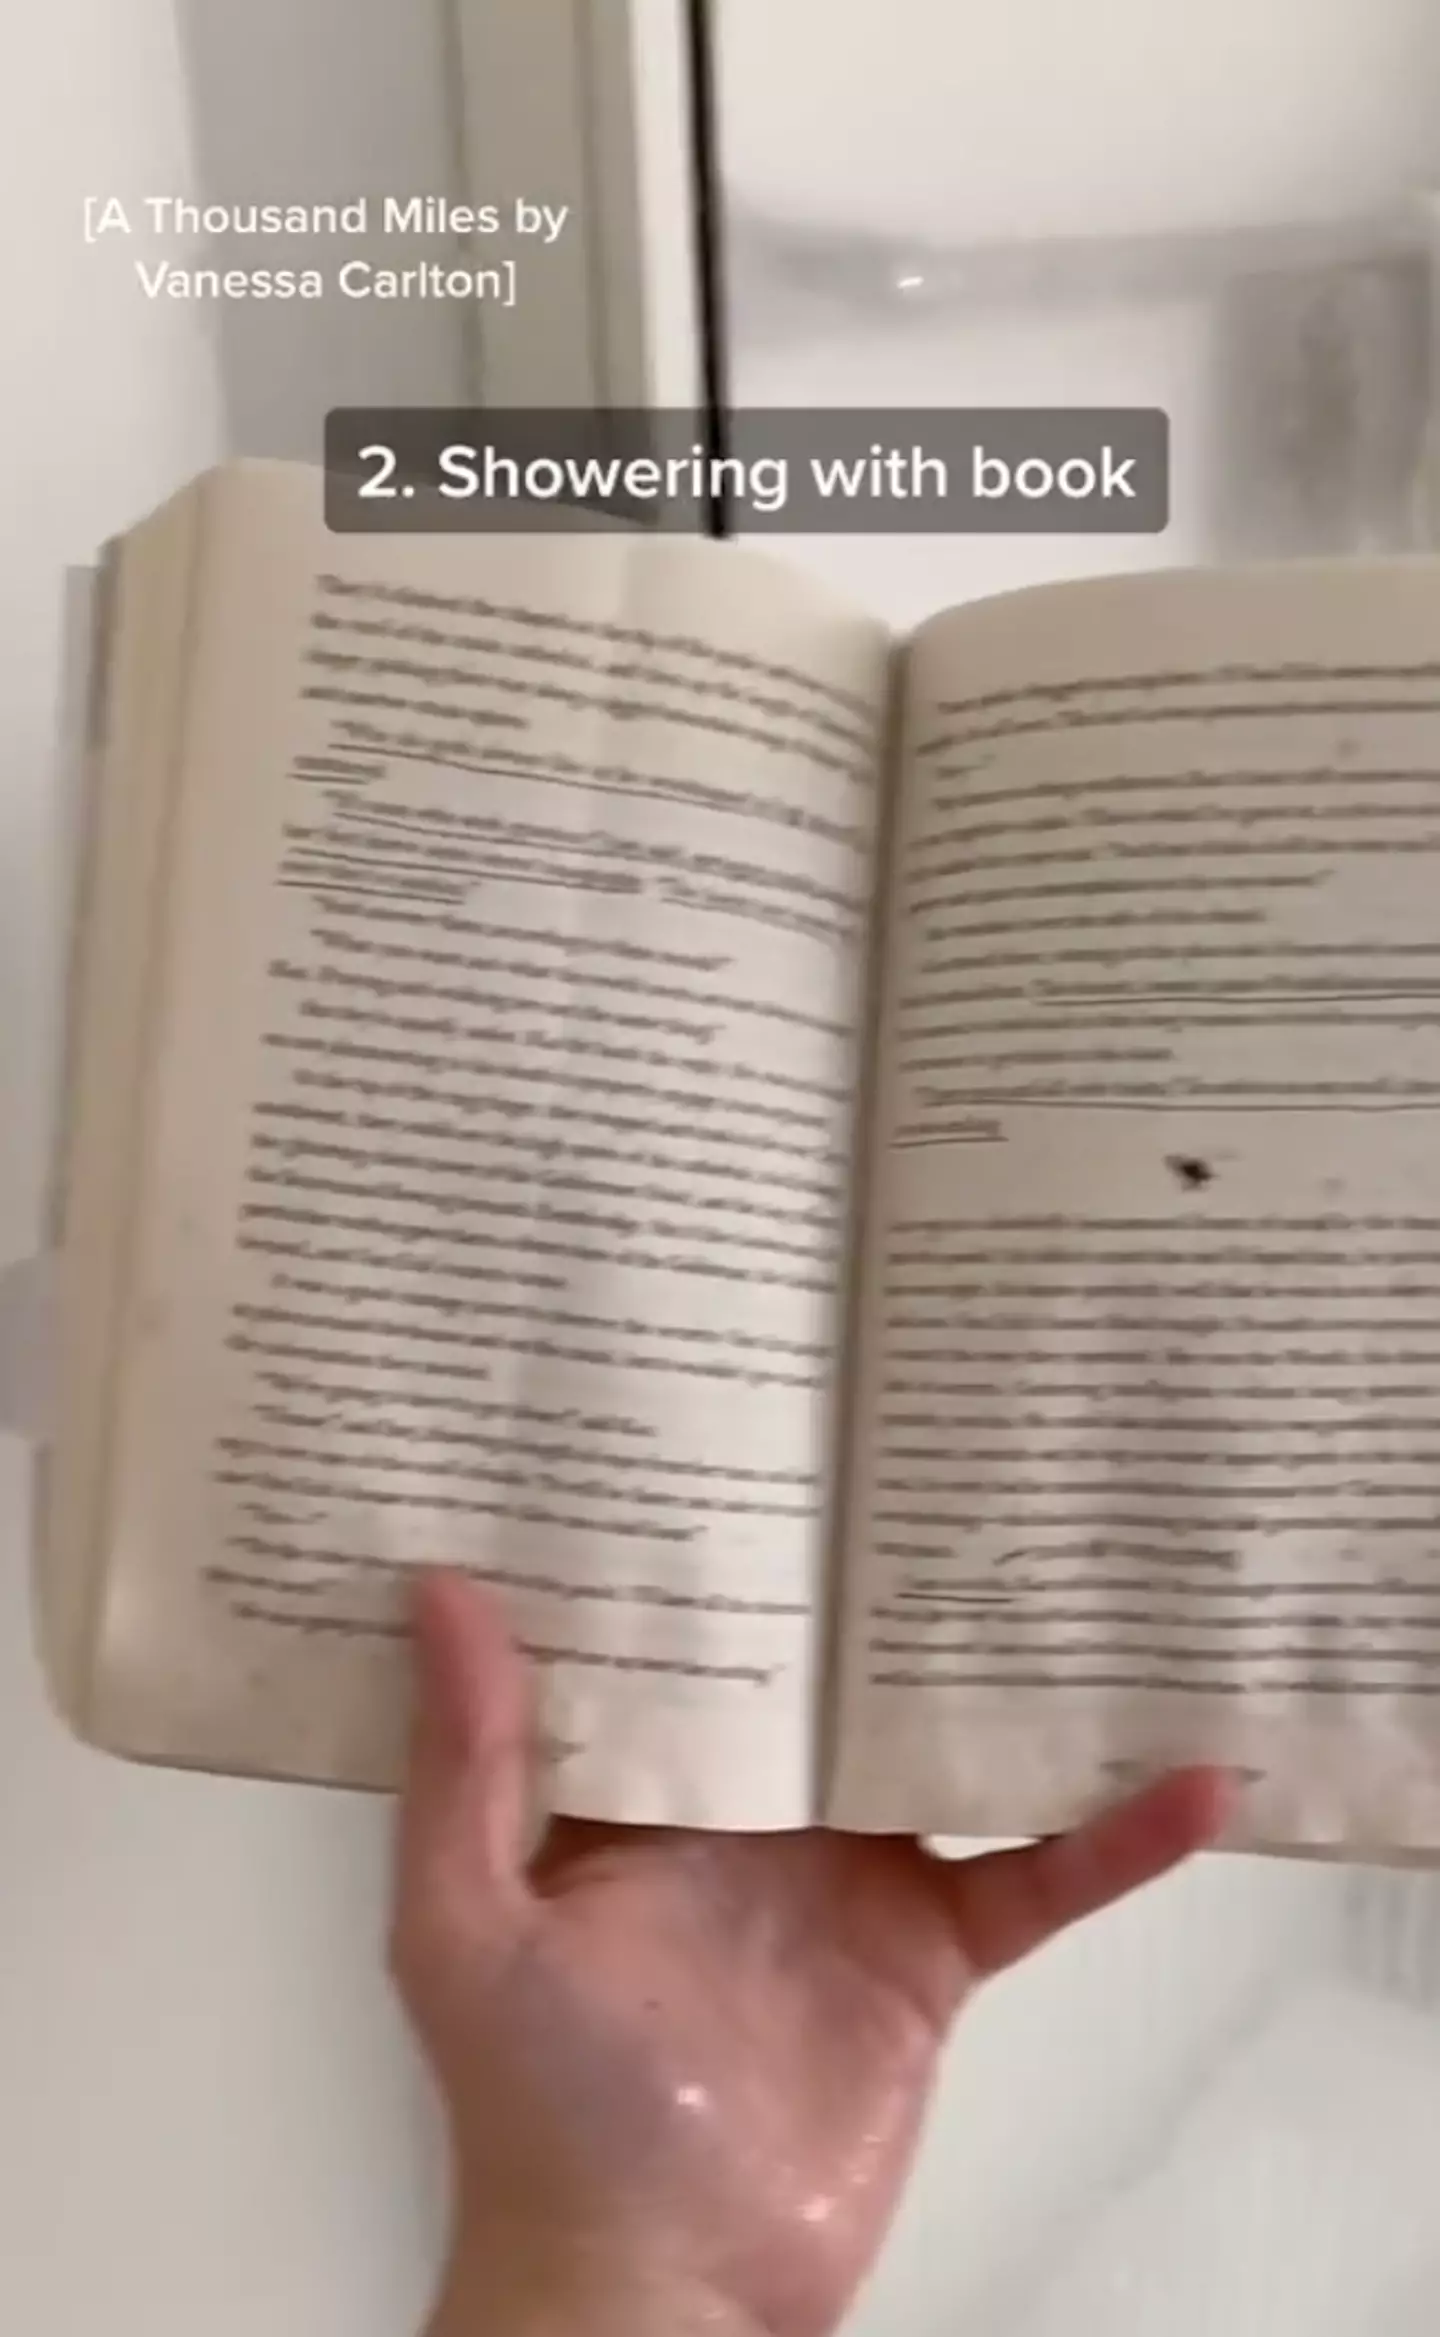 The woman also said she showers with her reading material.